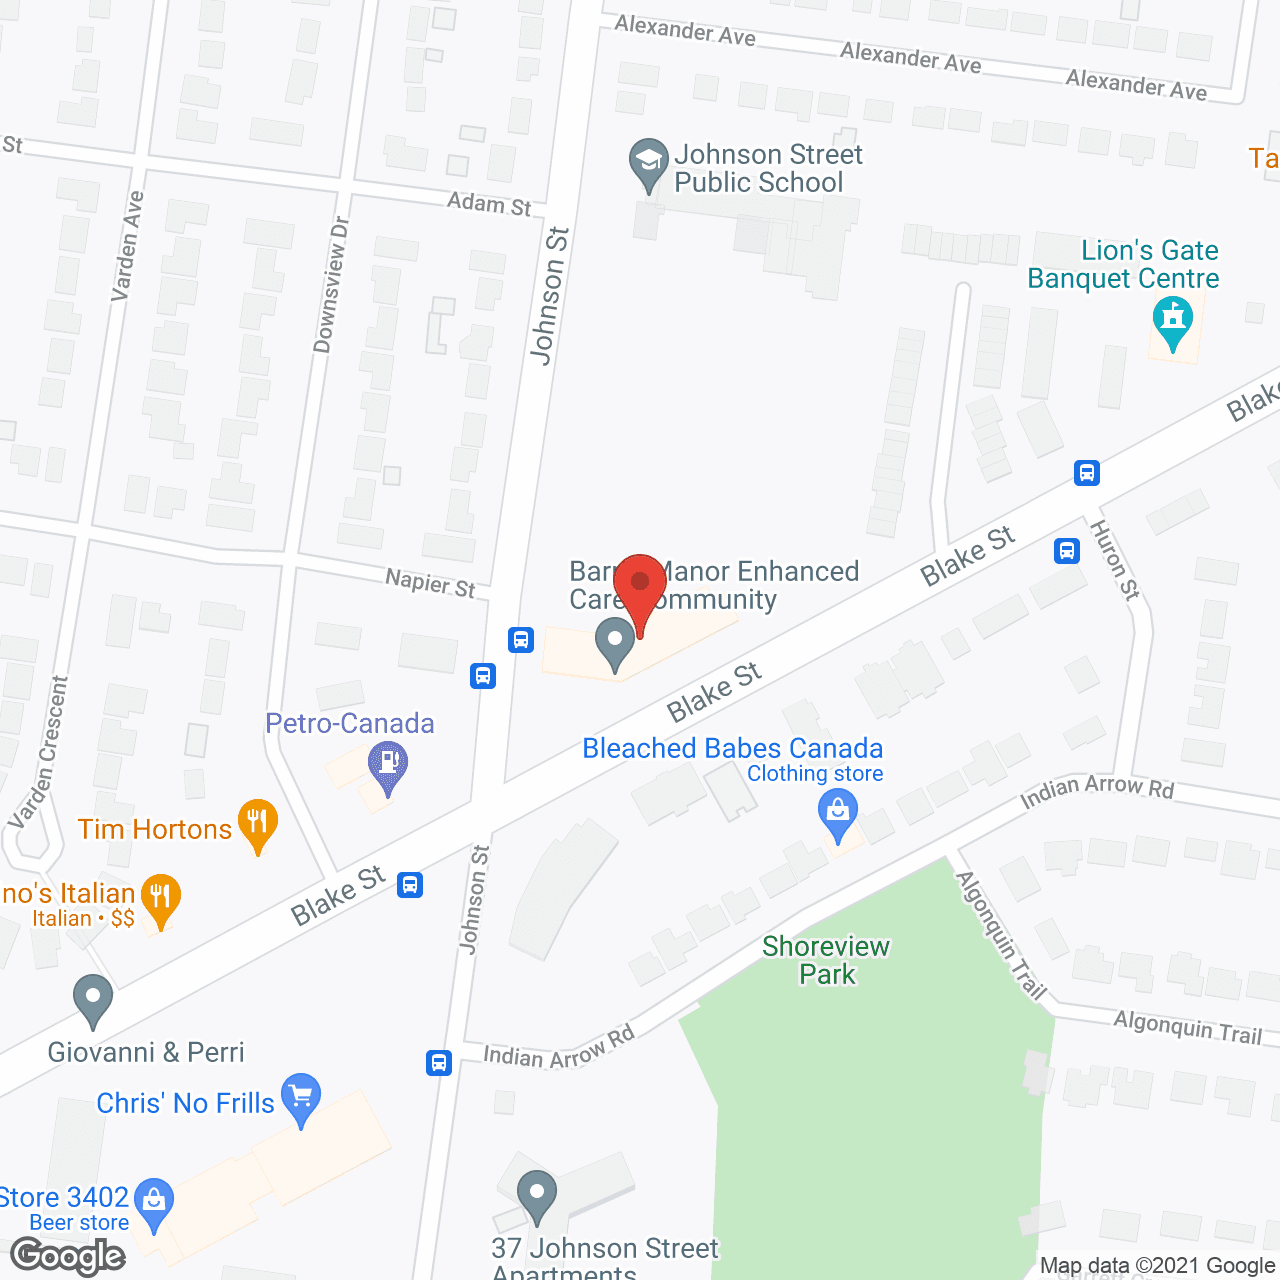 Barrie Manor Retirement Community in google map